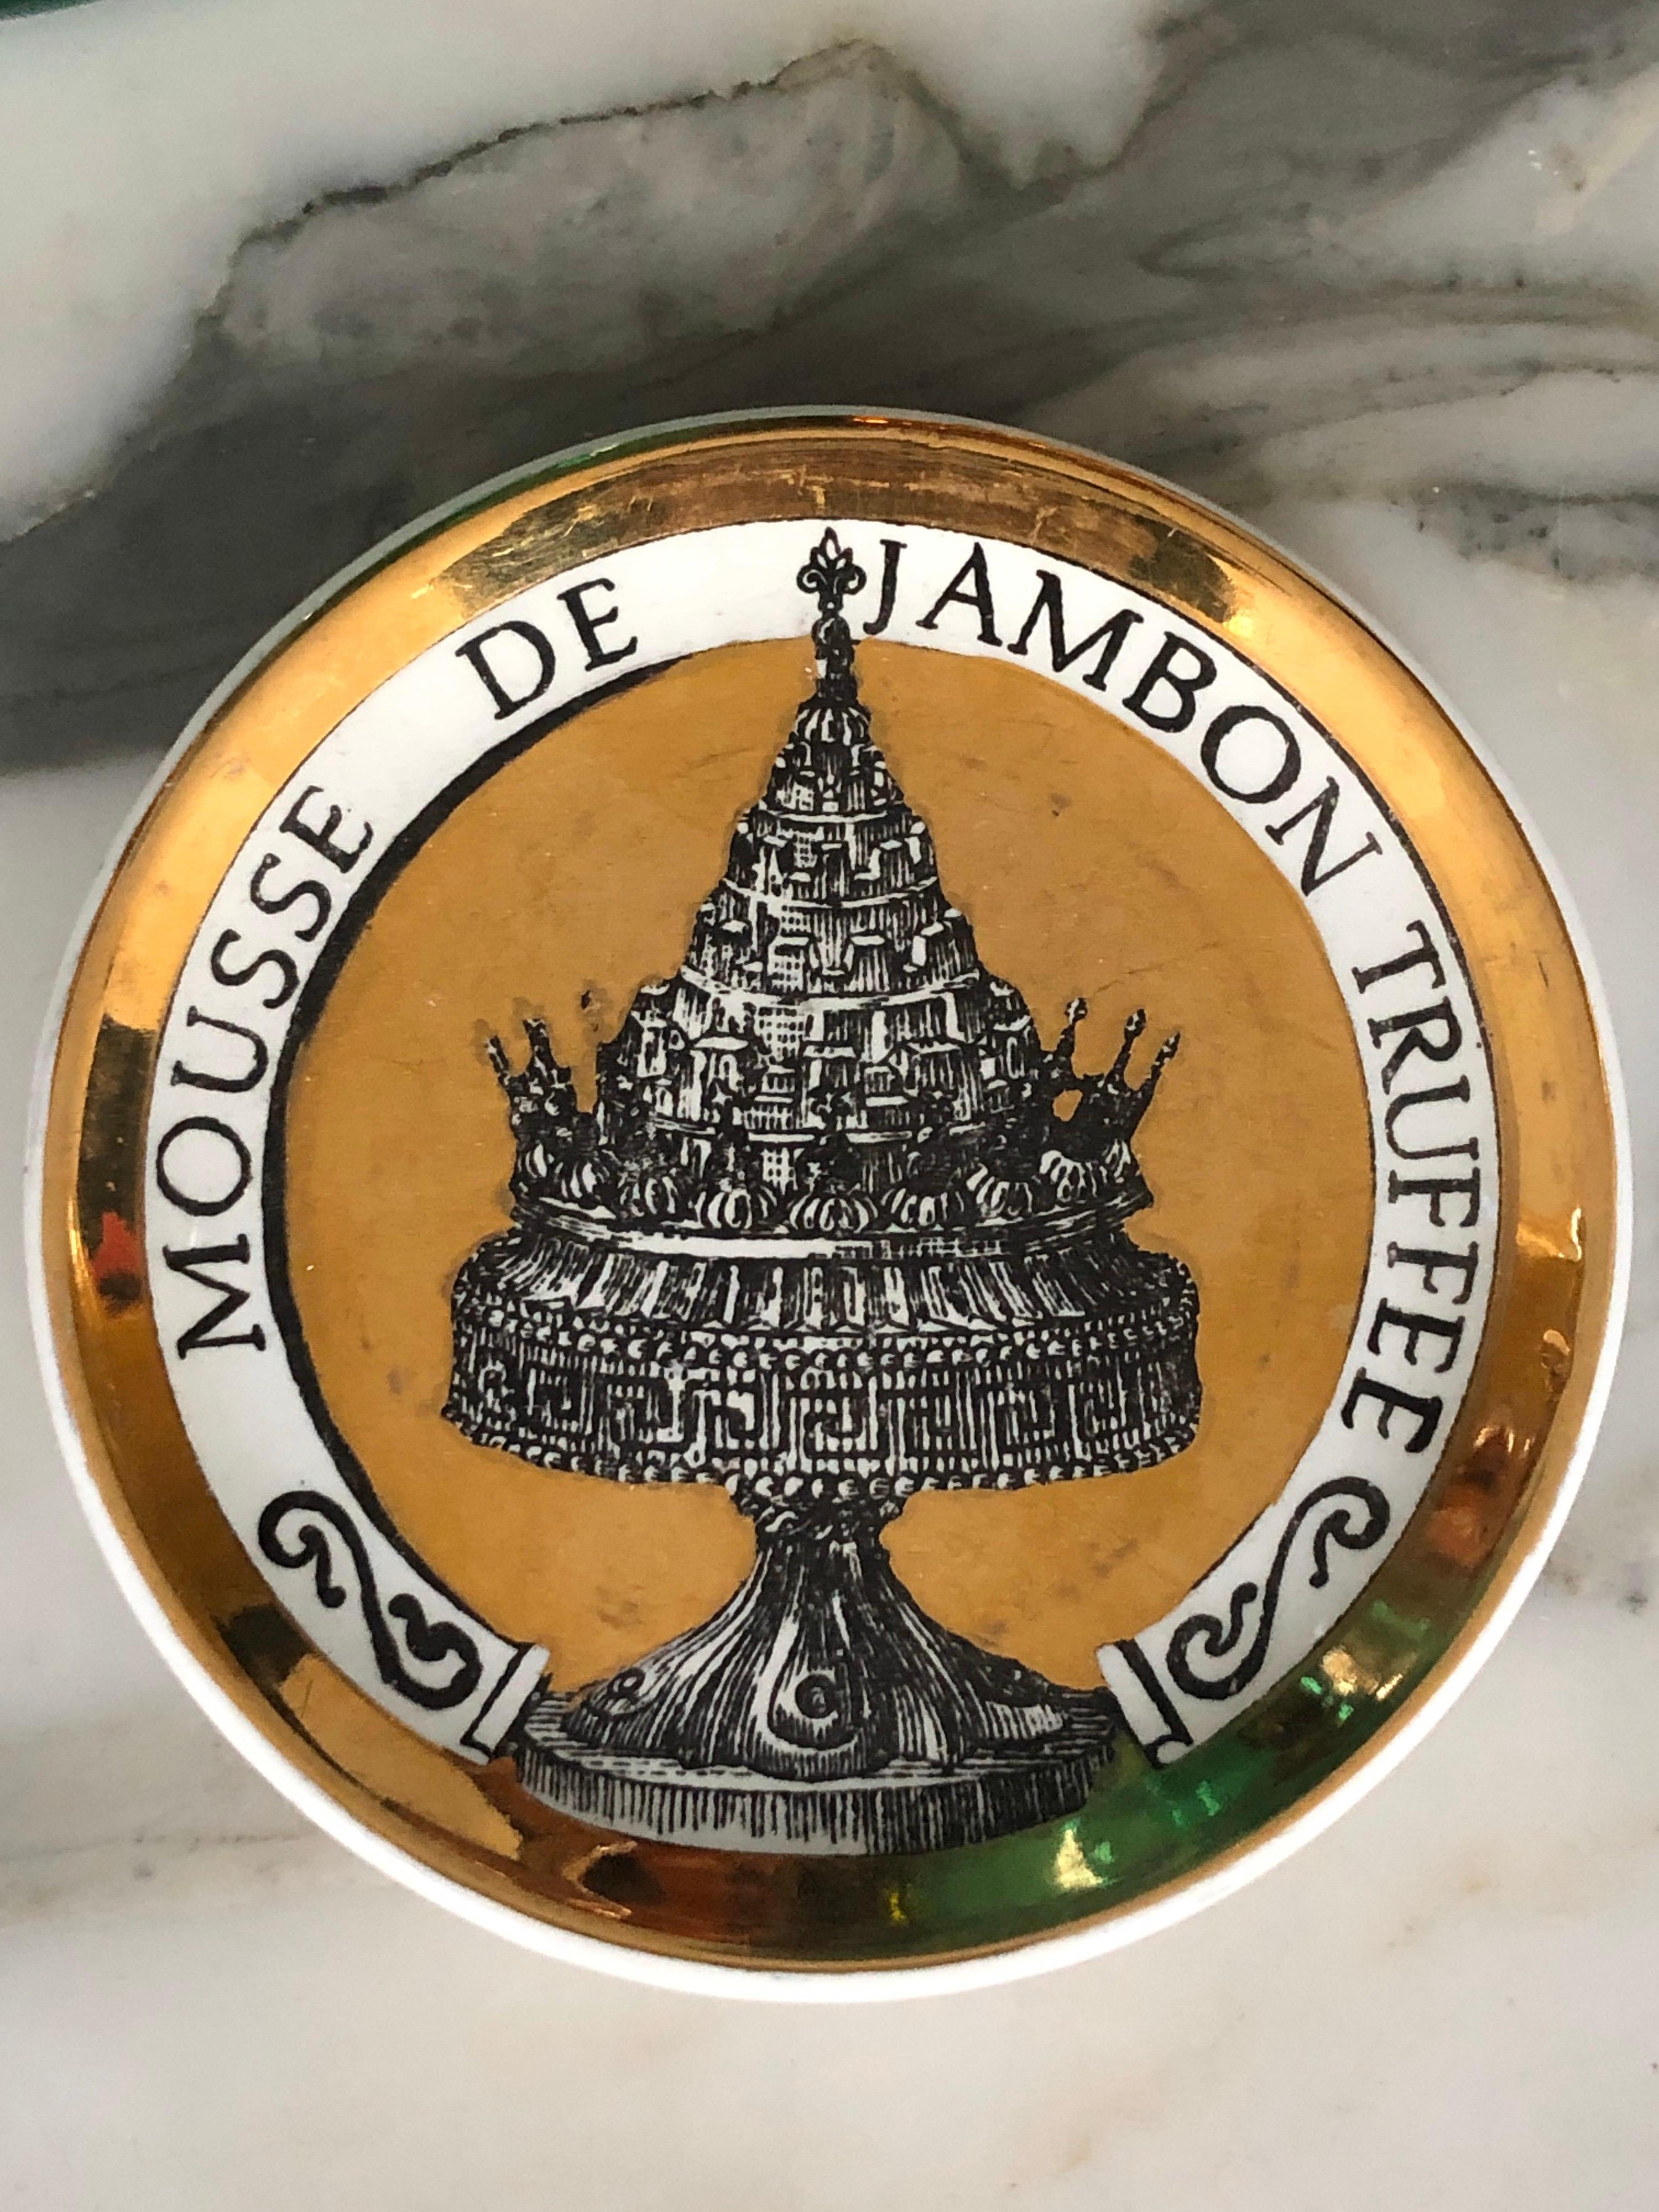 20th Century Piero Fornasetti Gilded Porcelain Coaster Set, French Cuisine from 1950